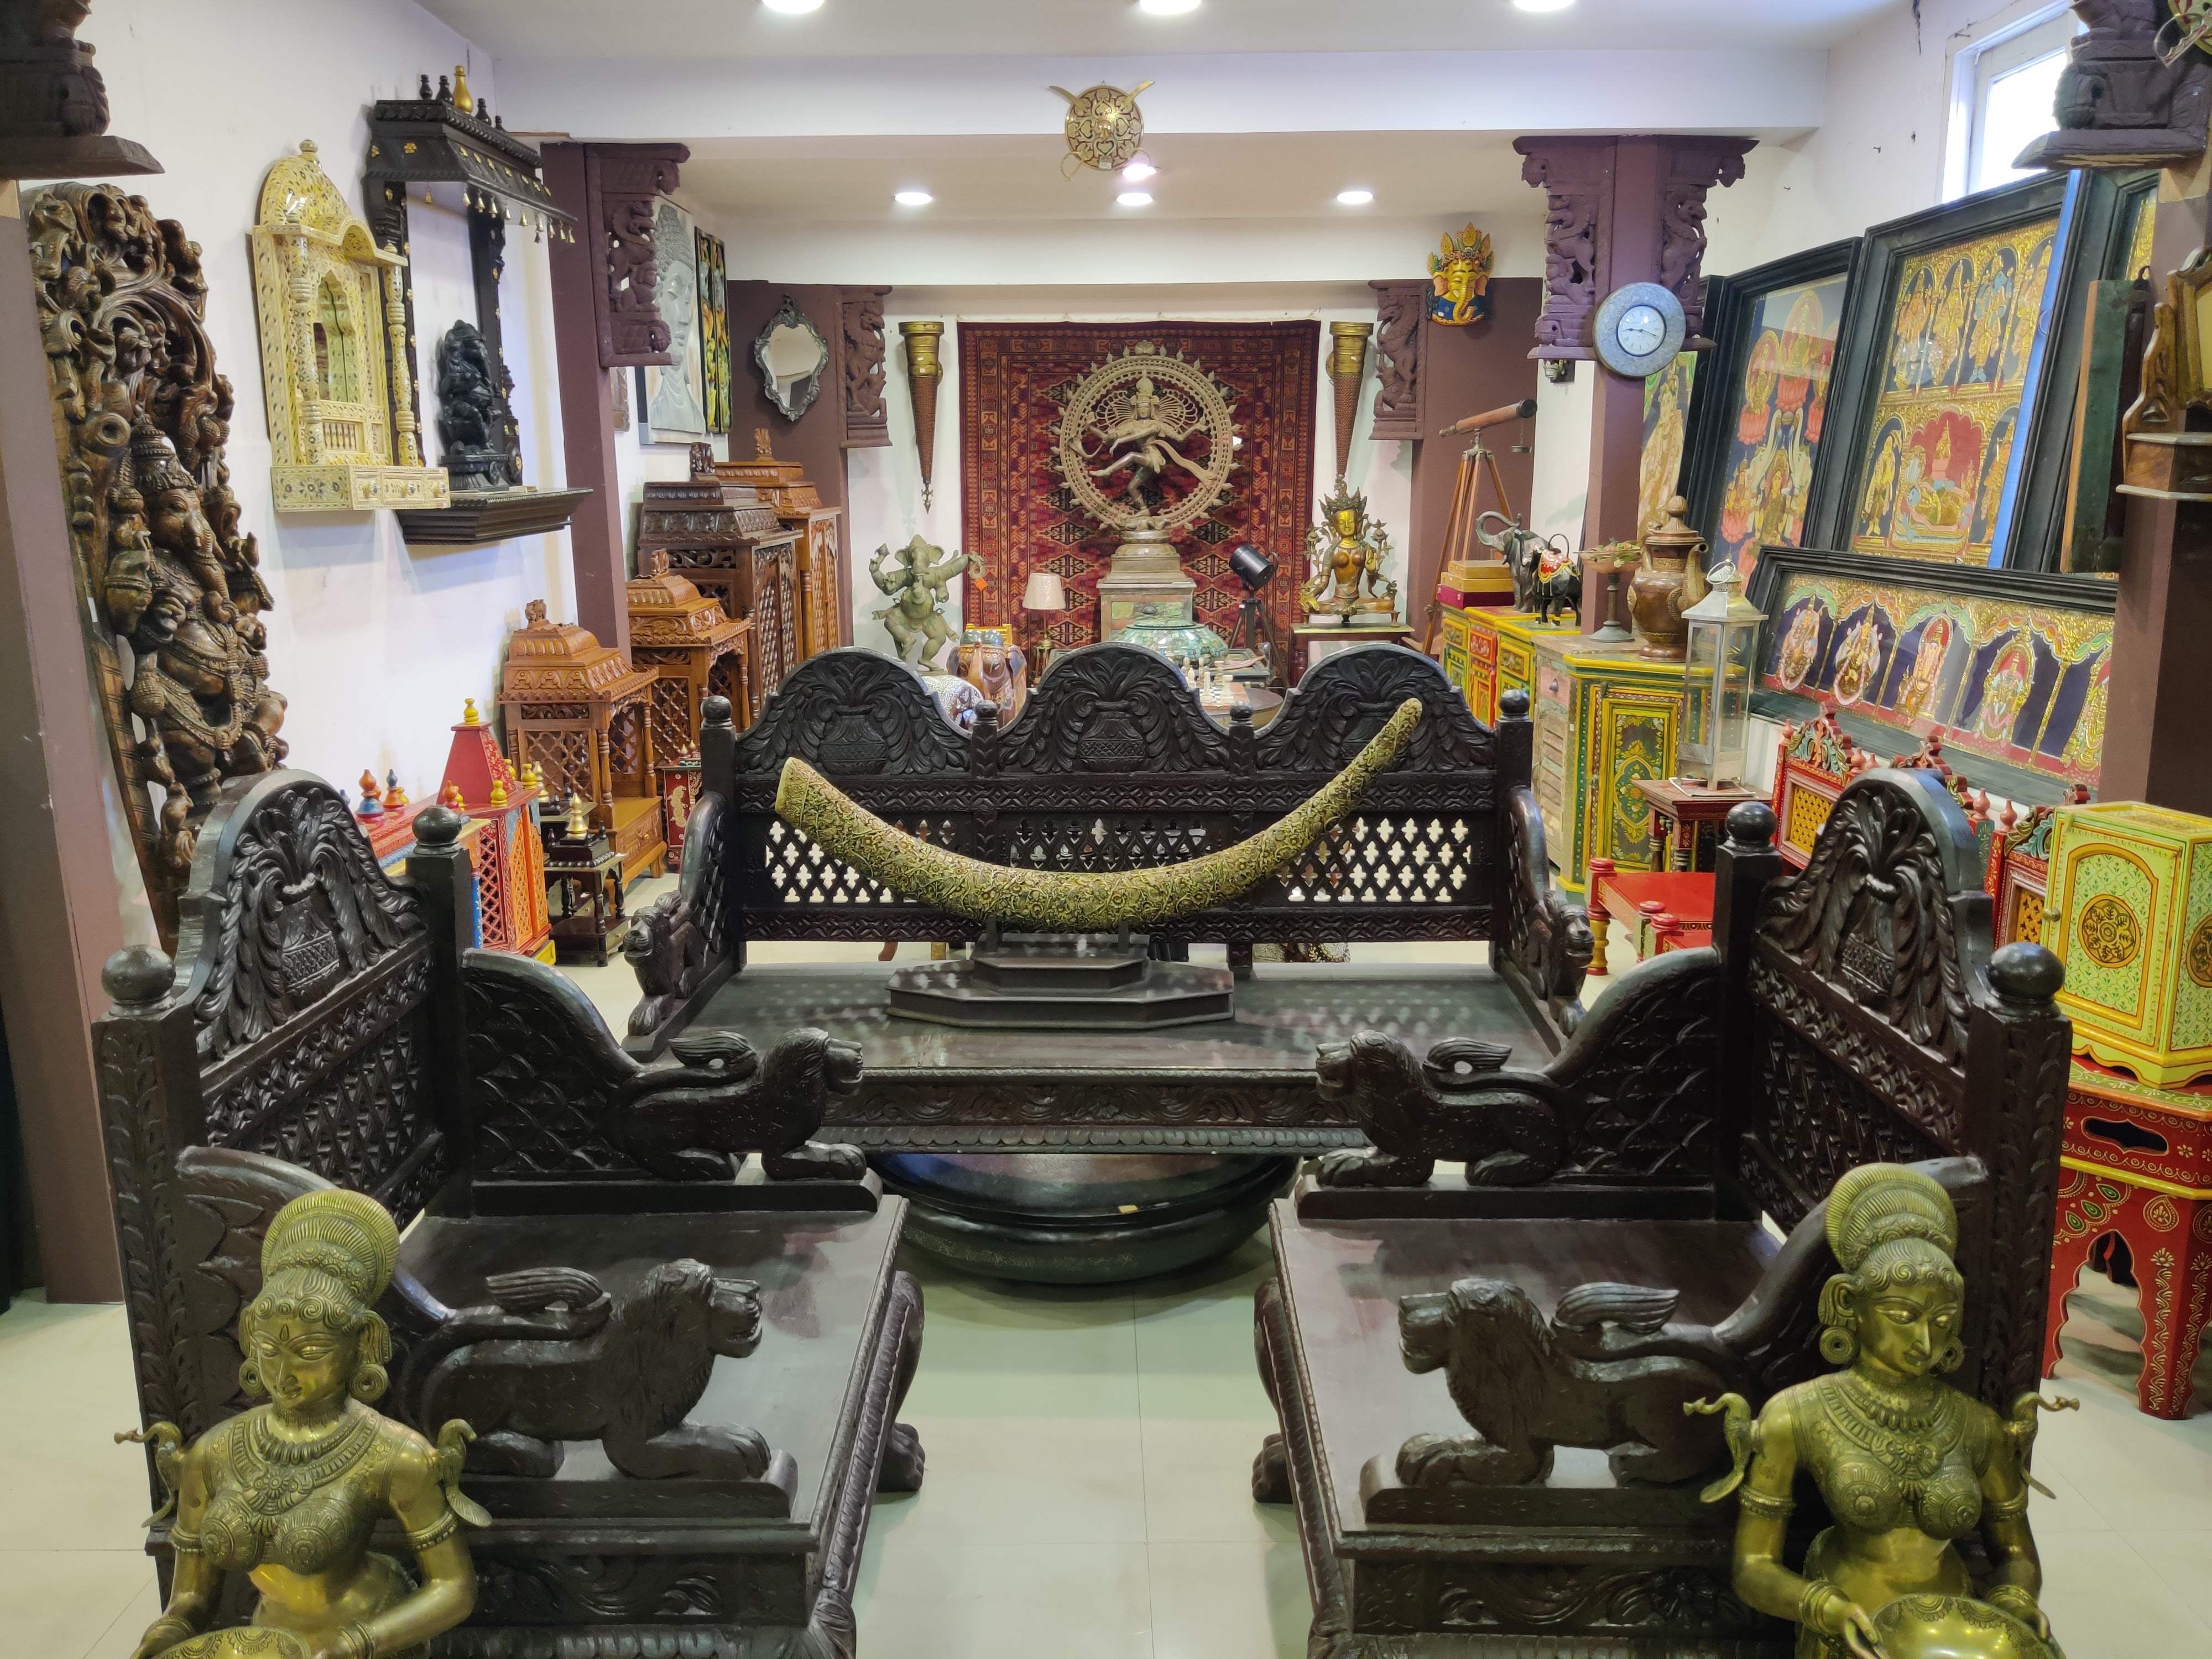 Furniture,Room,Chair,Building,Interior design,Architecture,Wat,Temple,Place of worship,Art